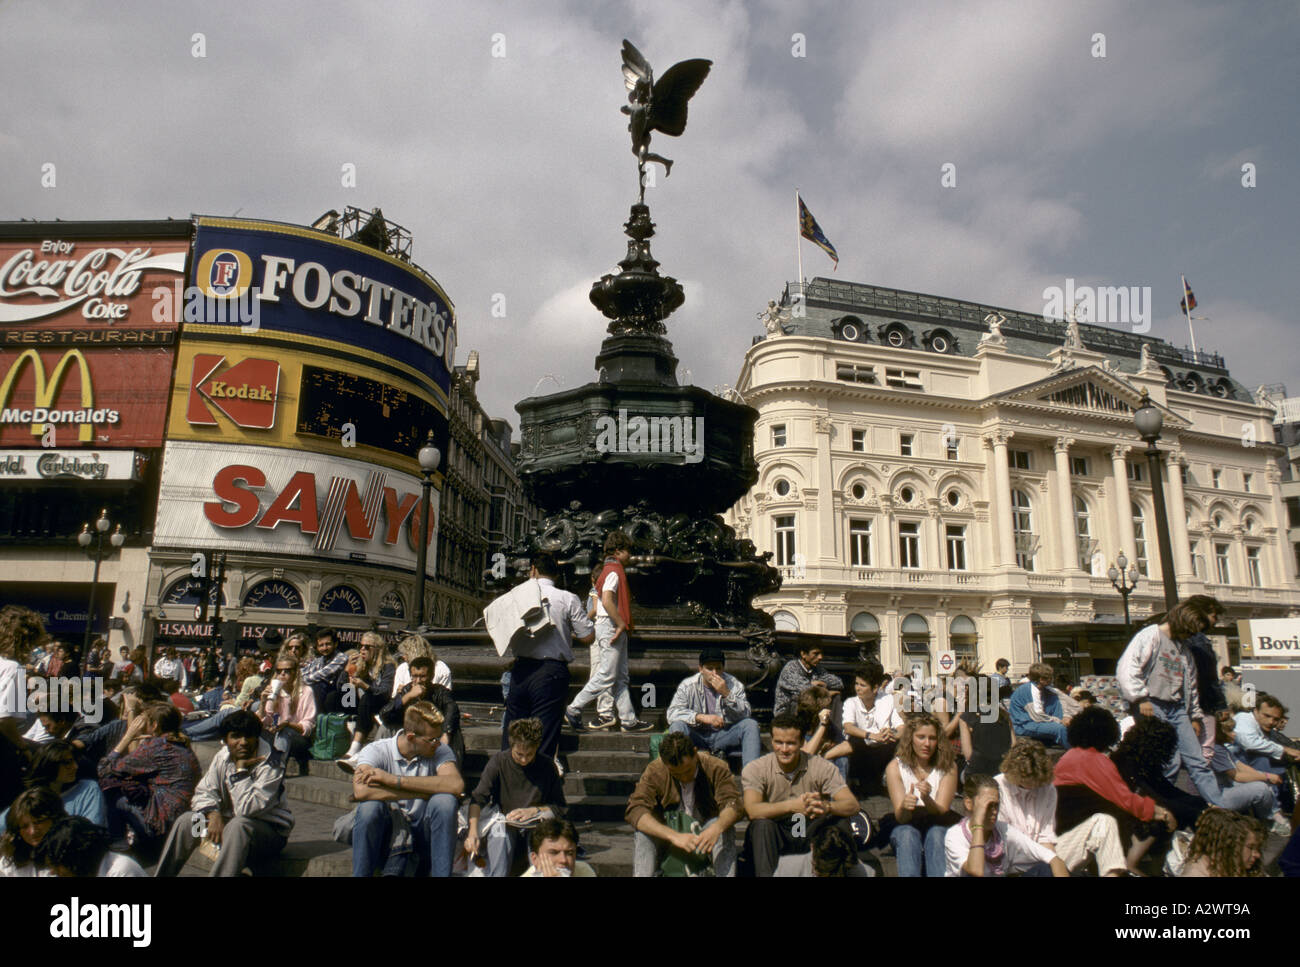 tourists sitting under the statue of eros in piccadilly circus, london Stock Photo